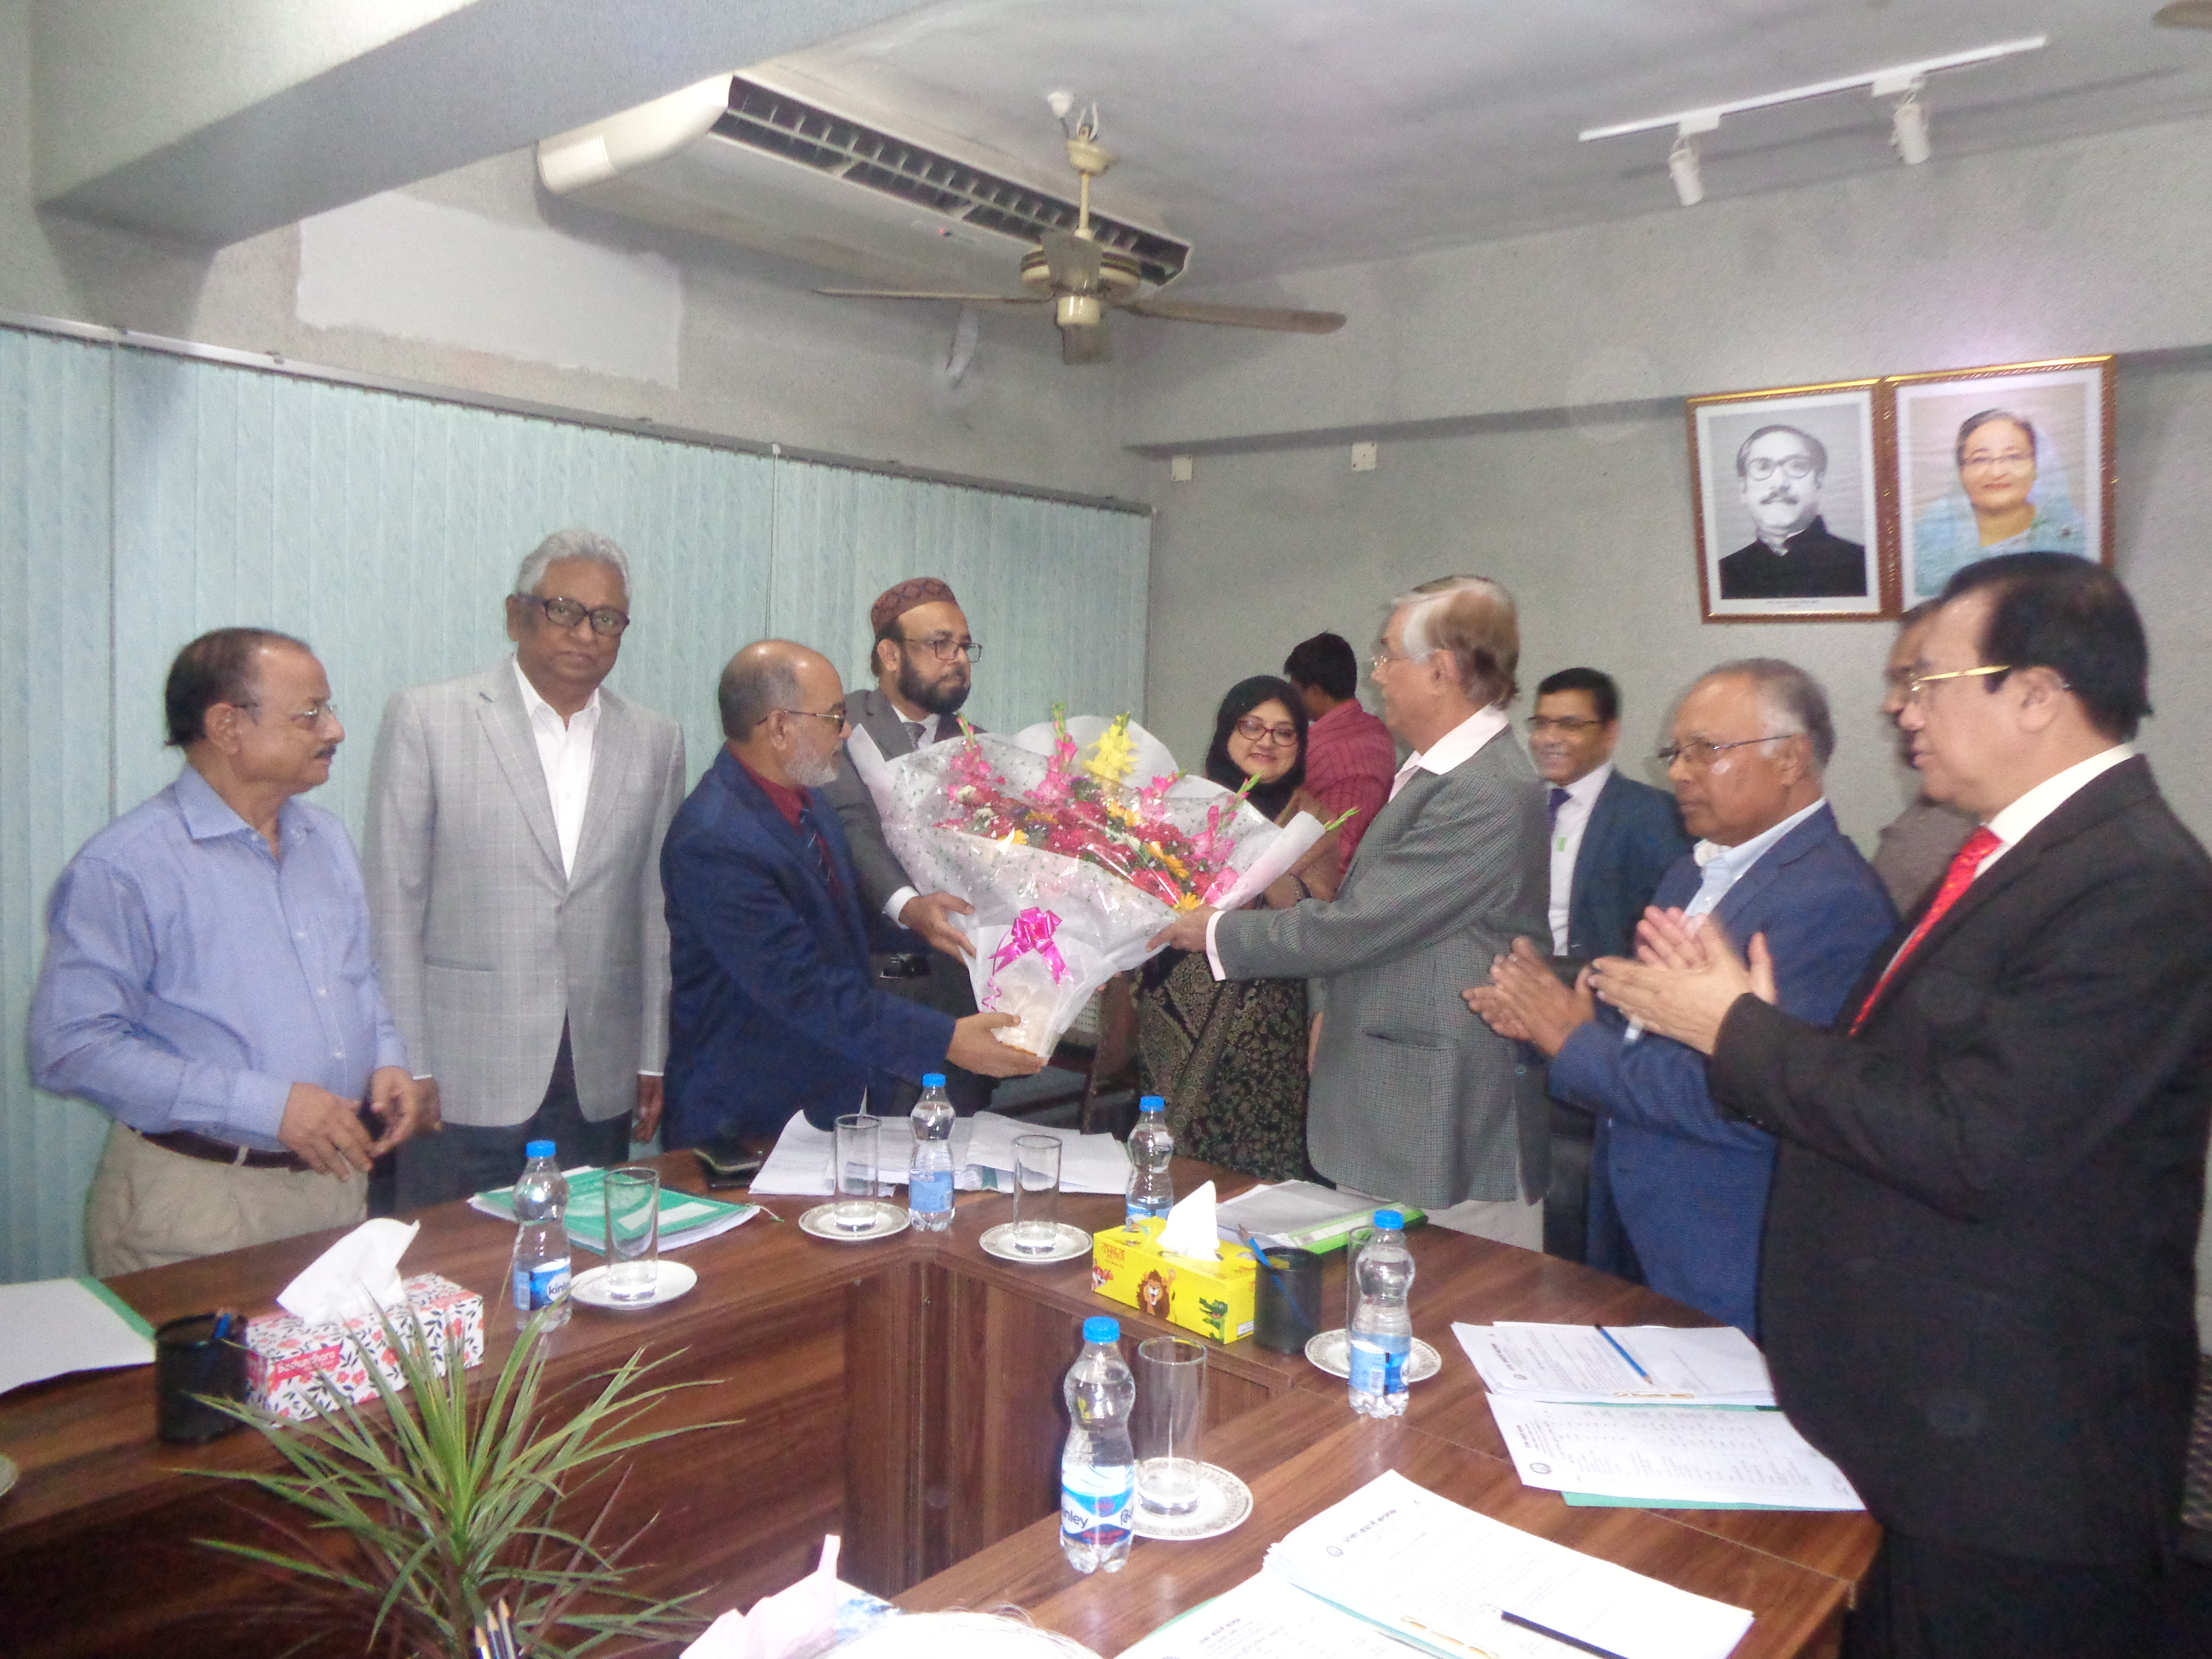 Farewell to Ex Principal Professor Md Abu Sayeed by the honourable Chairman and the members of the Governing Body on 16 February 2019